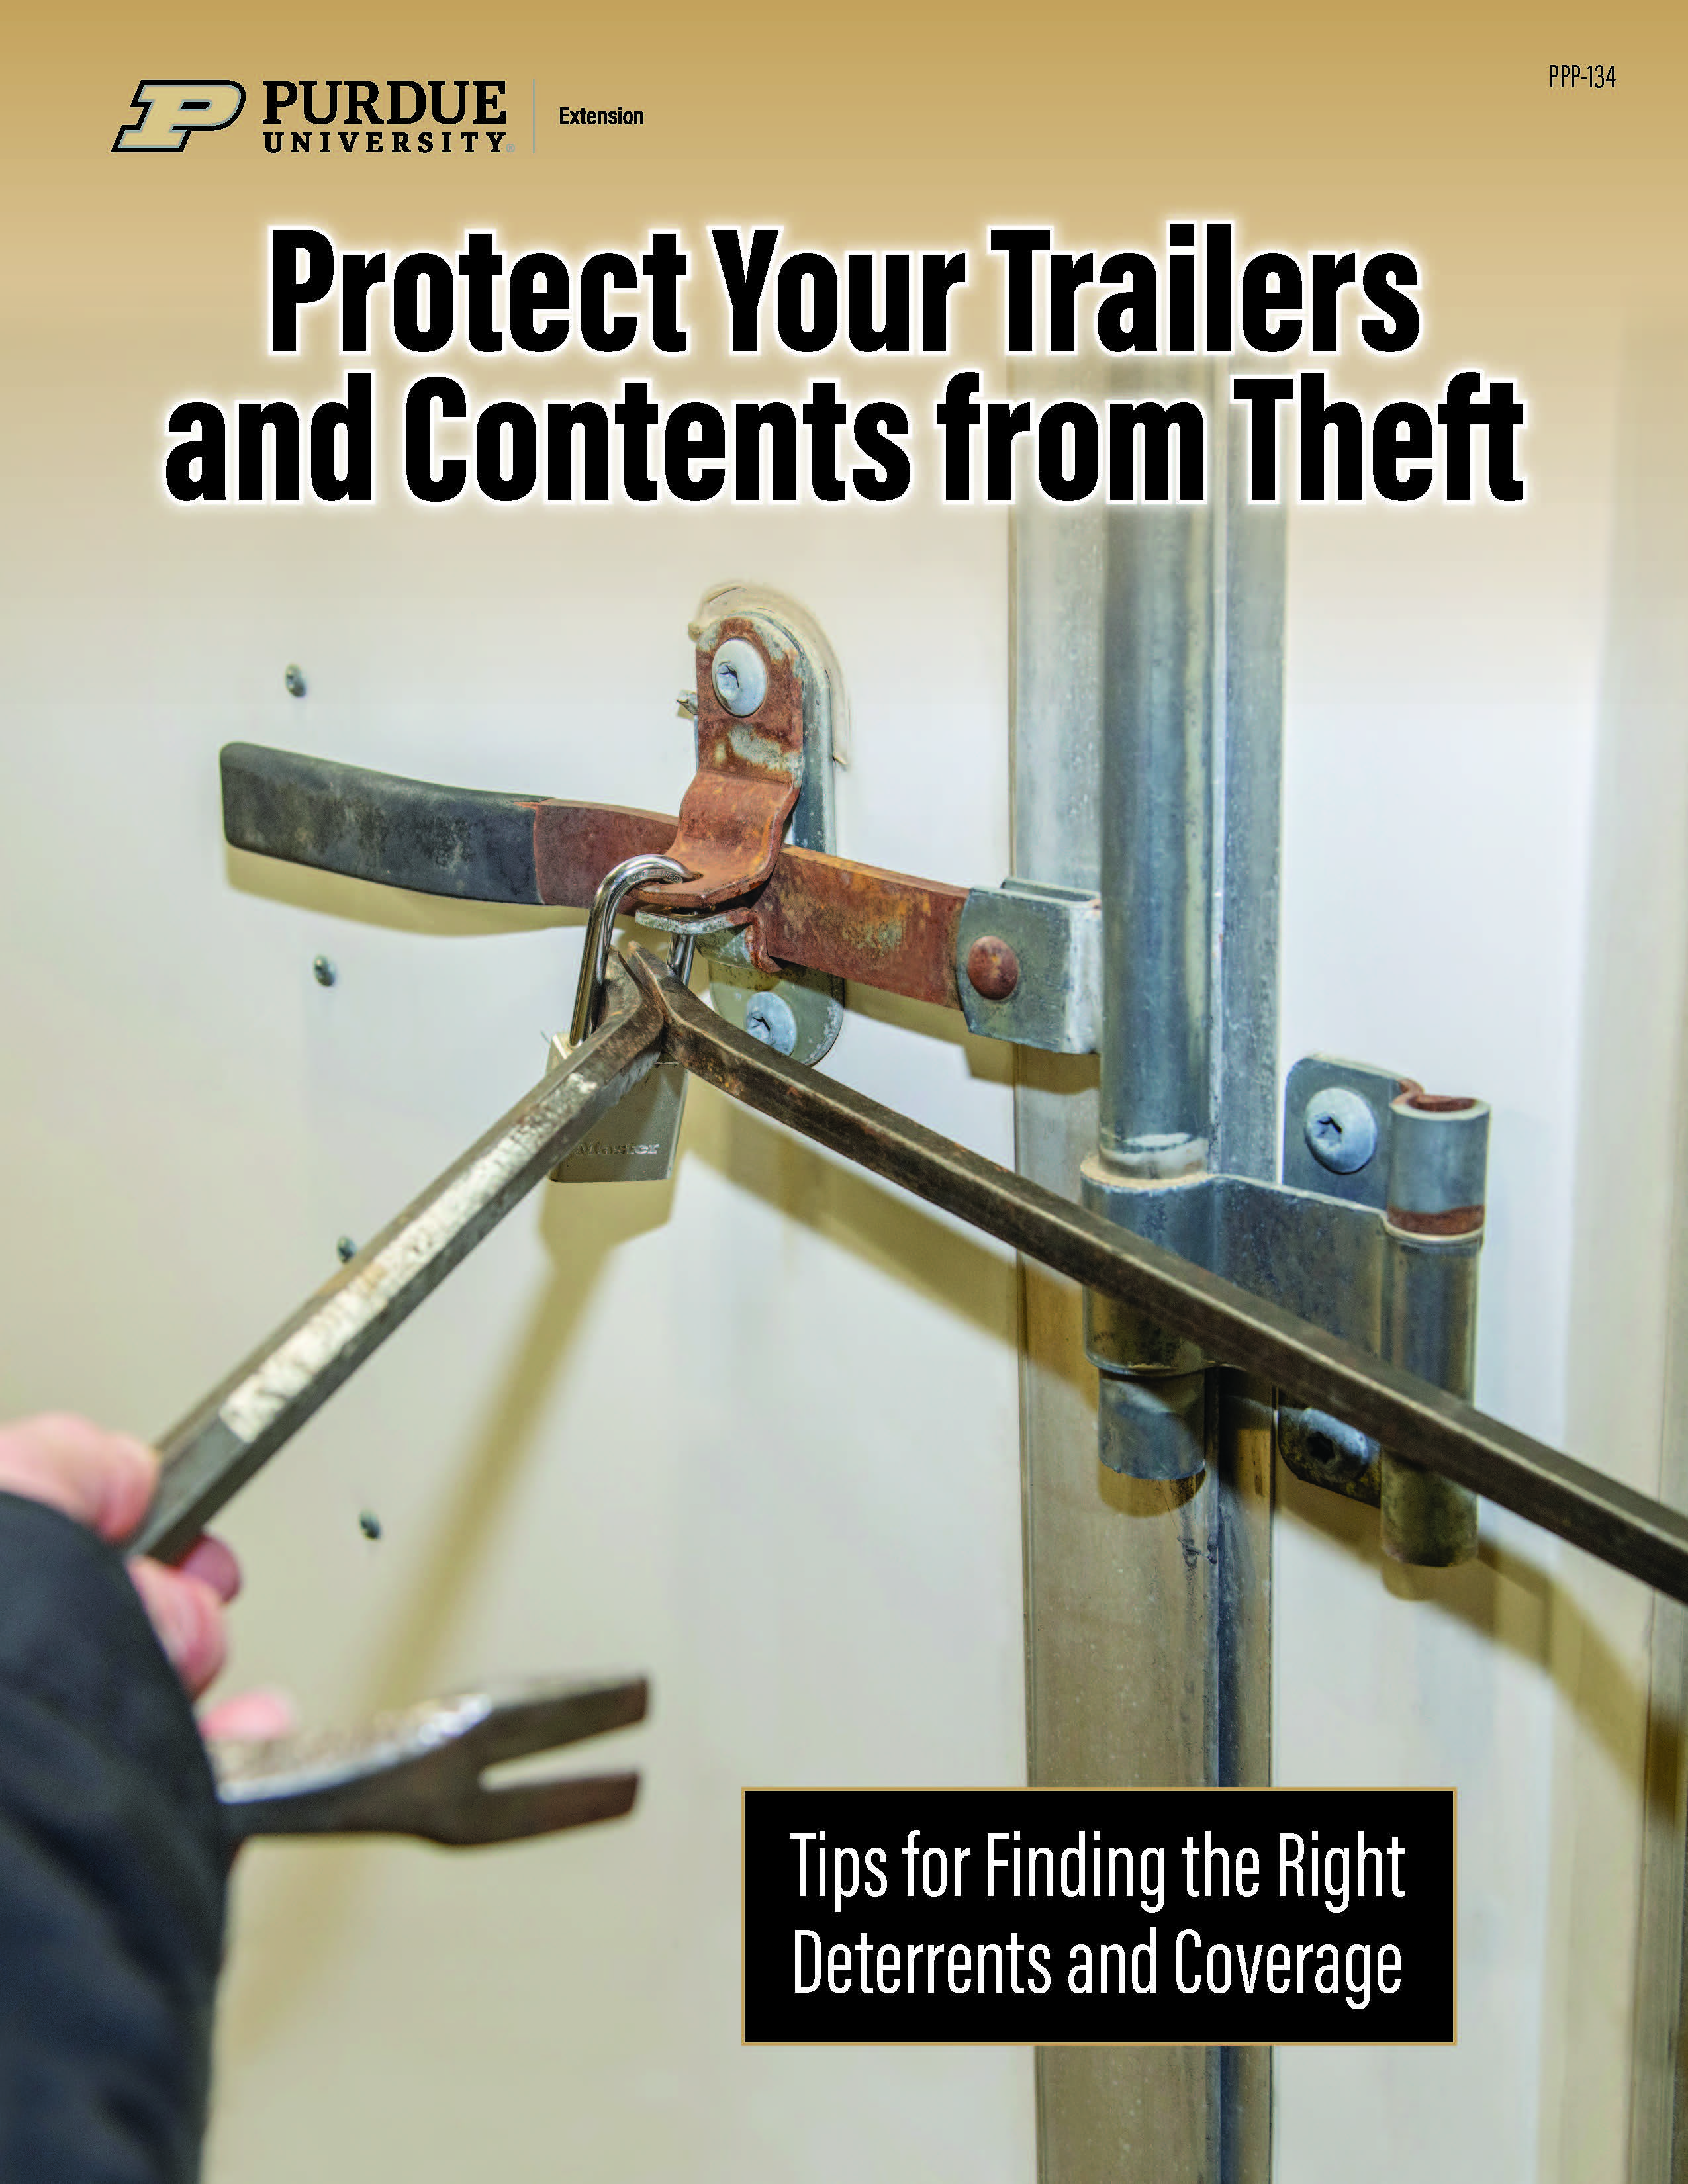 Protect Your Trailers and Contents from Theft: Tips for Finding the Right Deterrents and Coverage